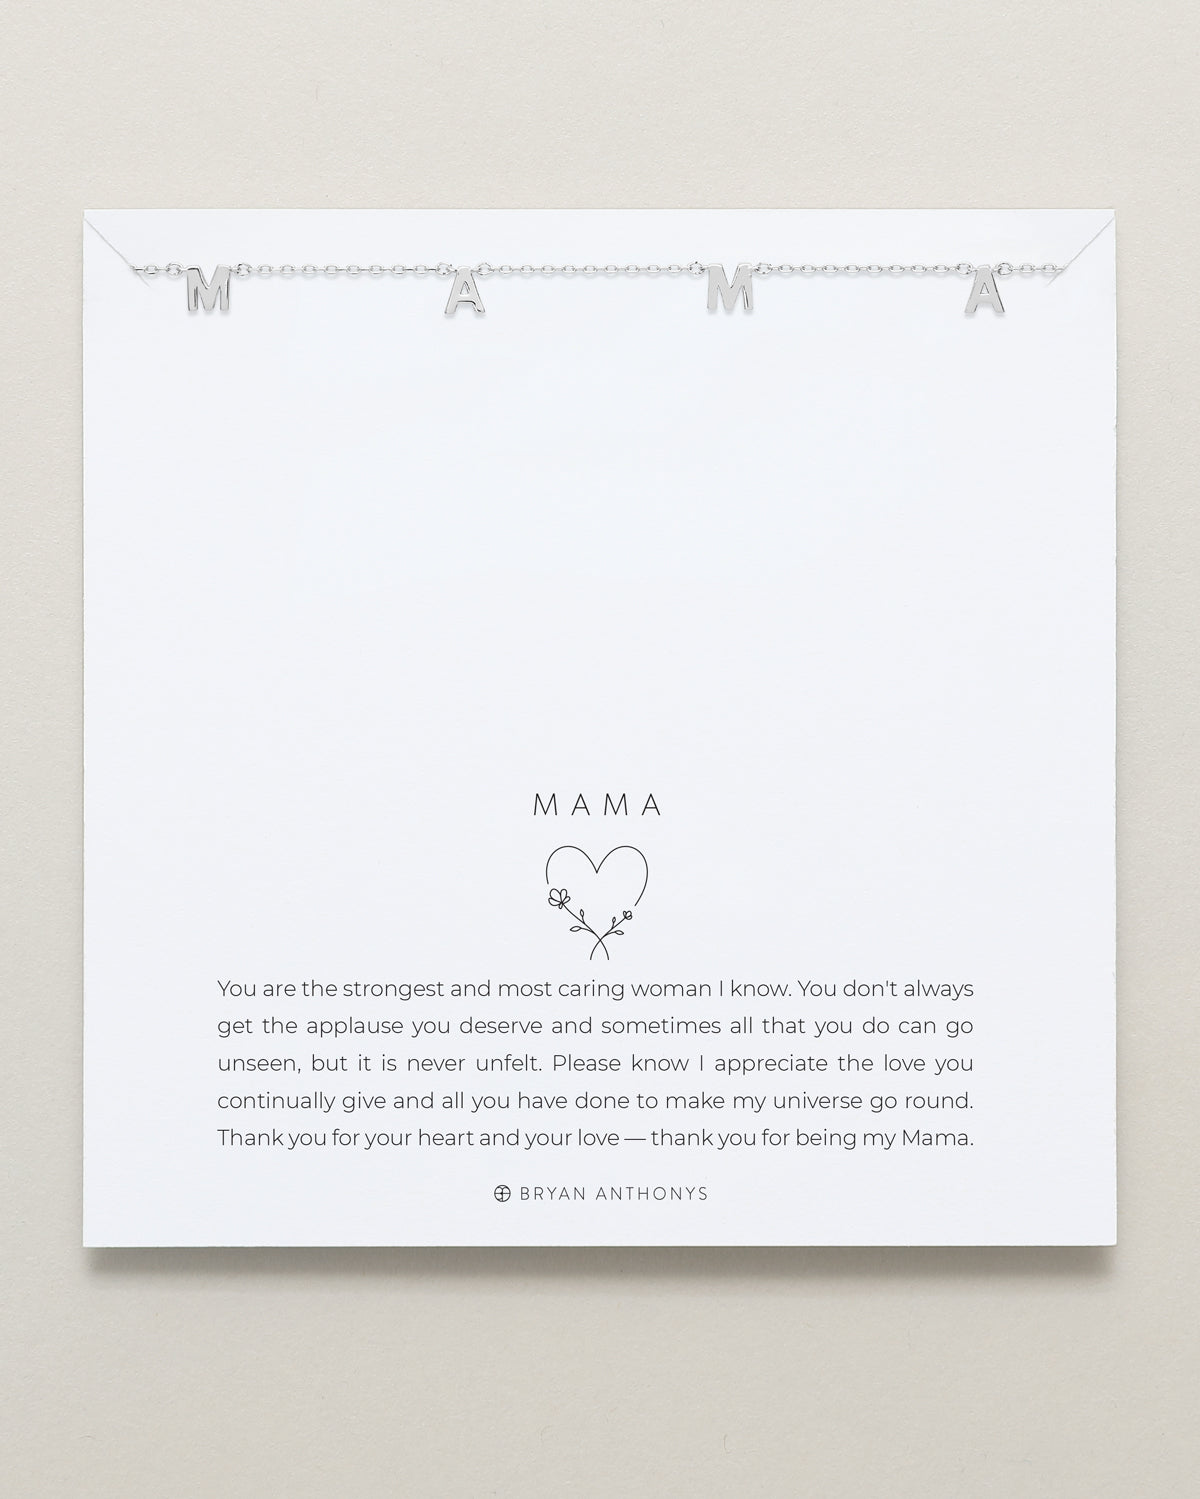 Bryan Anthonys Mama Silver Smooth Necklace On Card